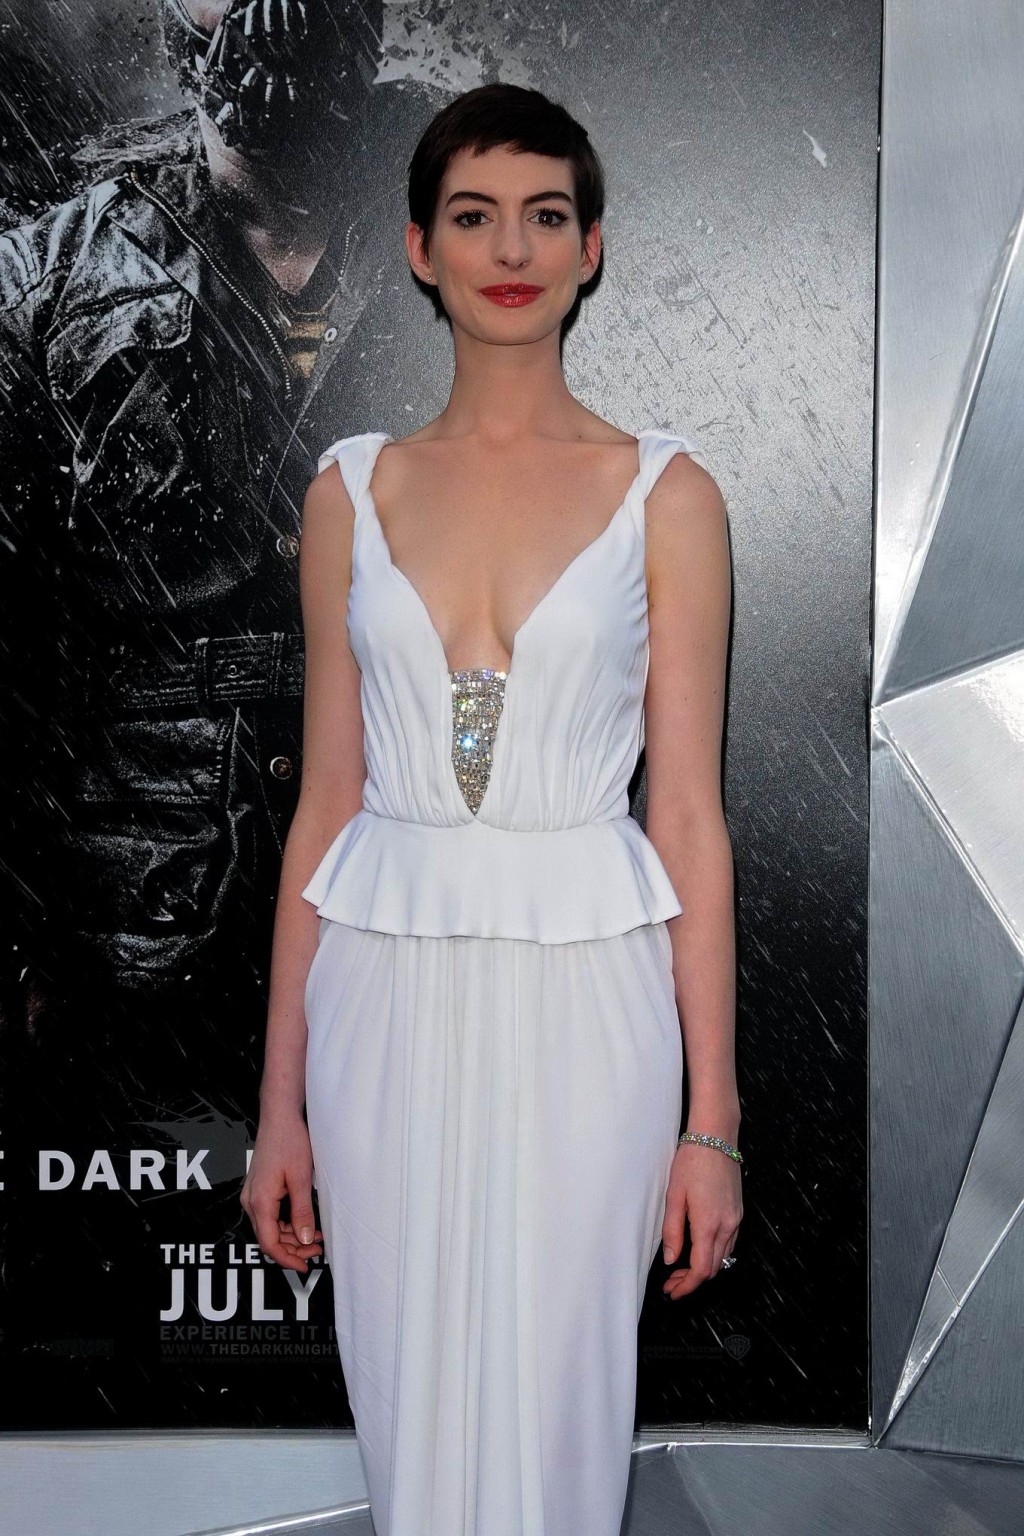 Anne Hathaway showing cleavage in white dress at 'Dark Knight Rises' premiere in #75257413